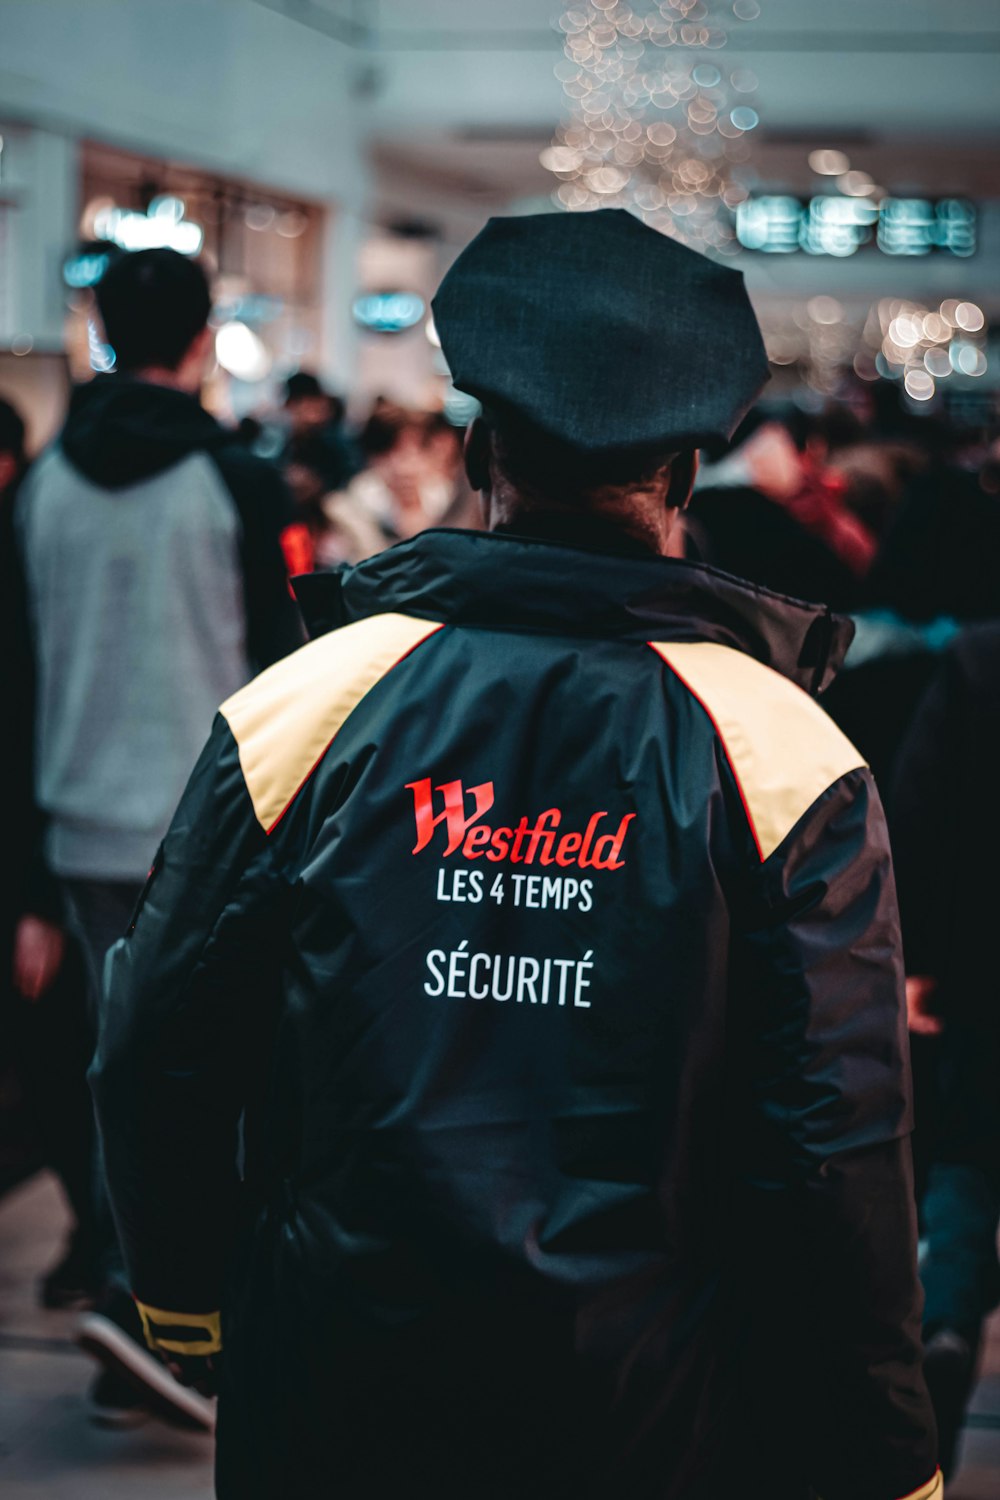 person wearing black and white Westfield jacket